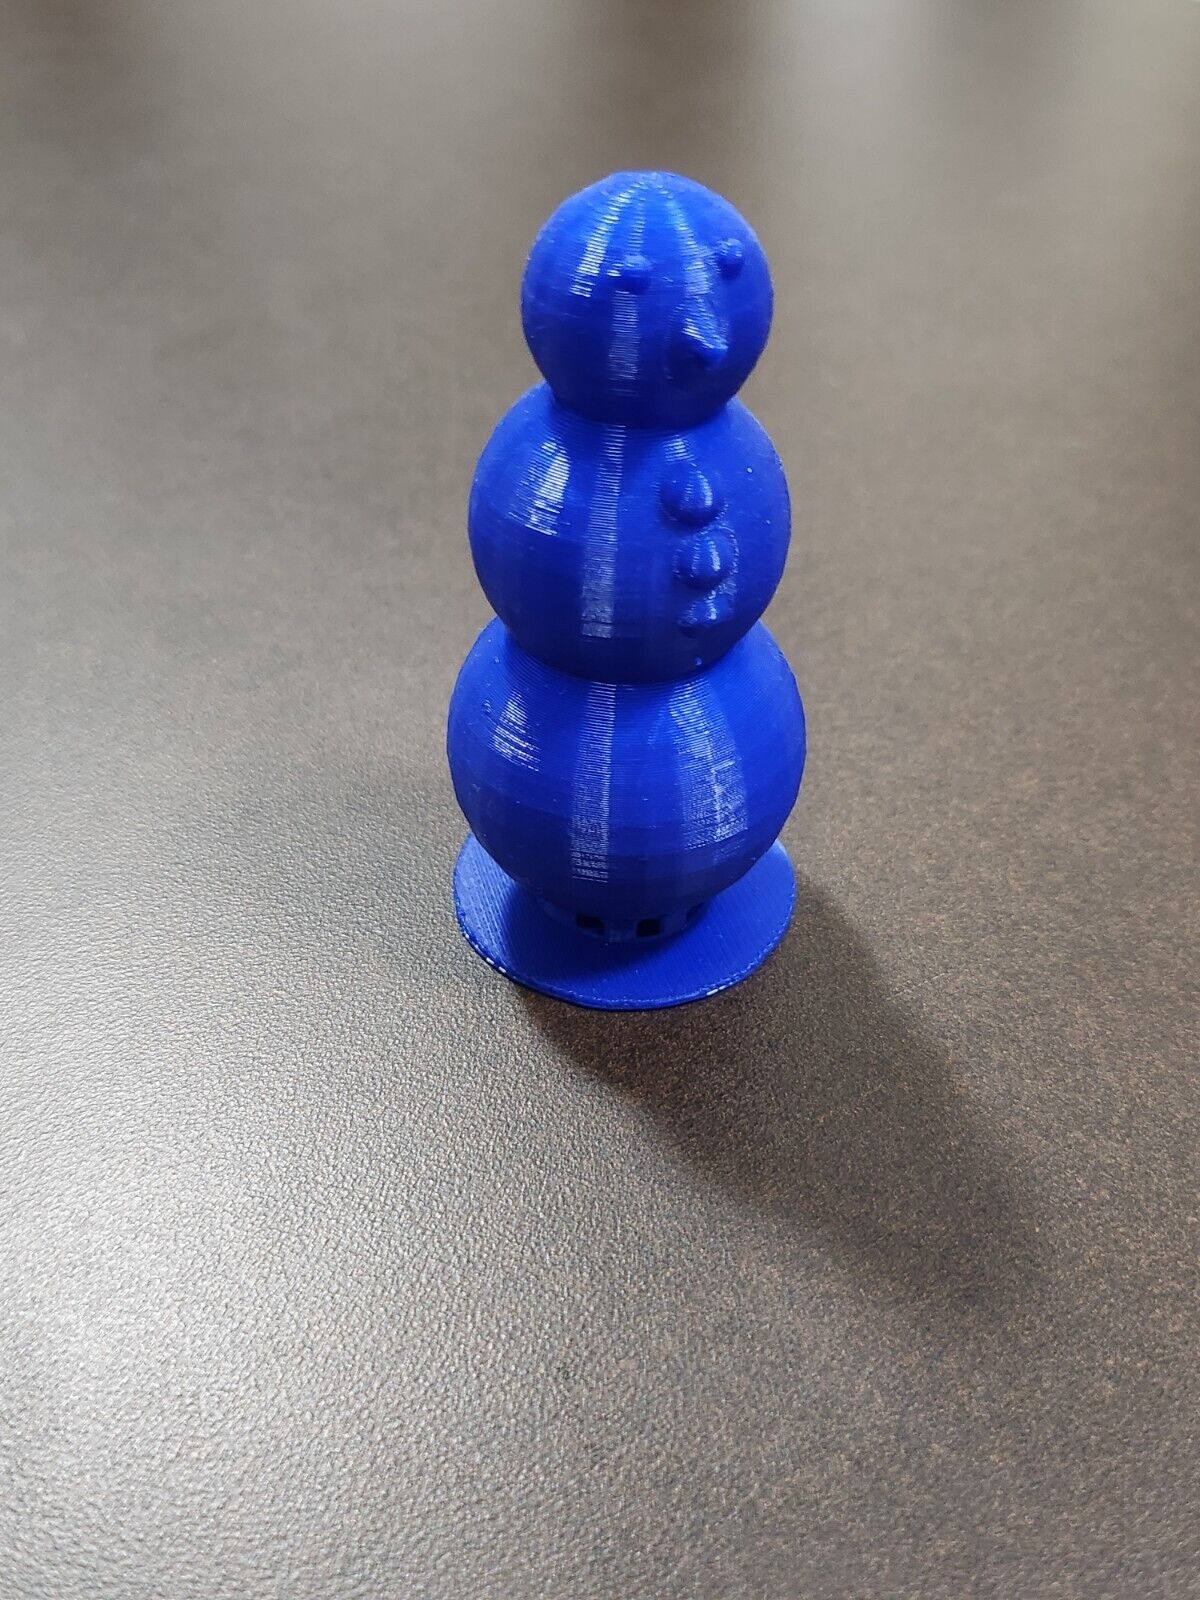 Festive 3D Printed Snowman Model - Perfect Holiday Decoration